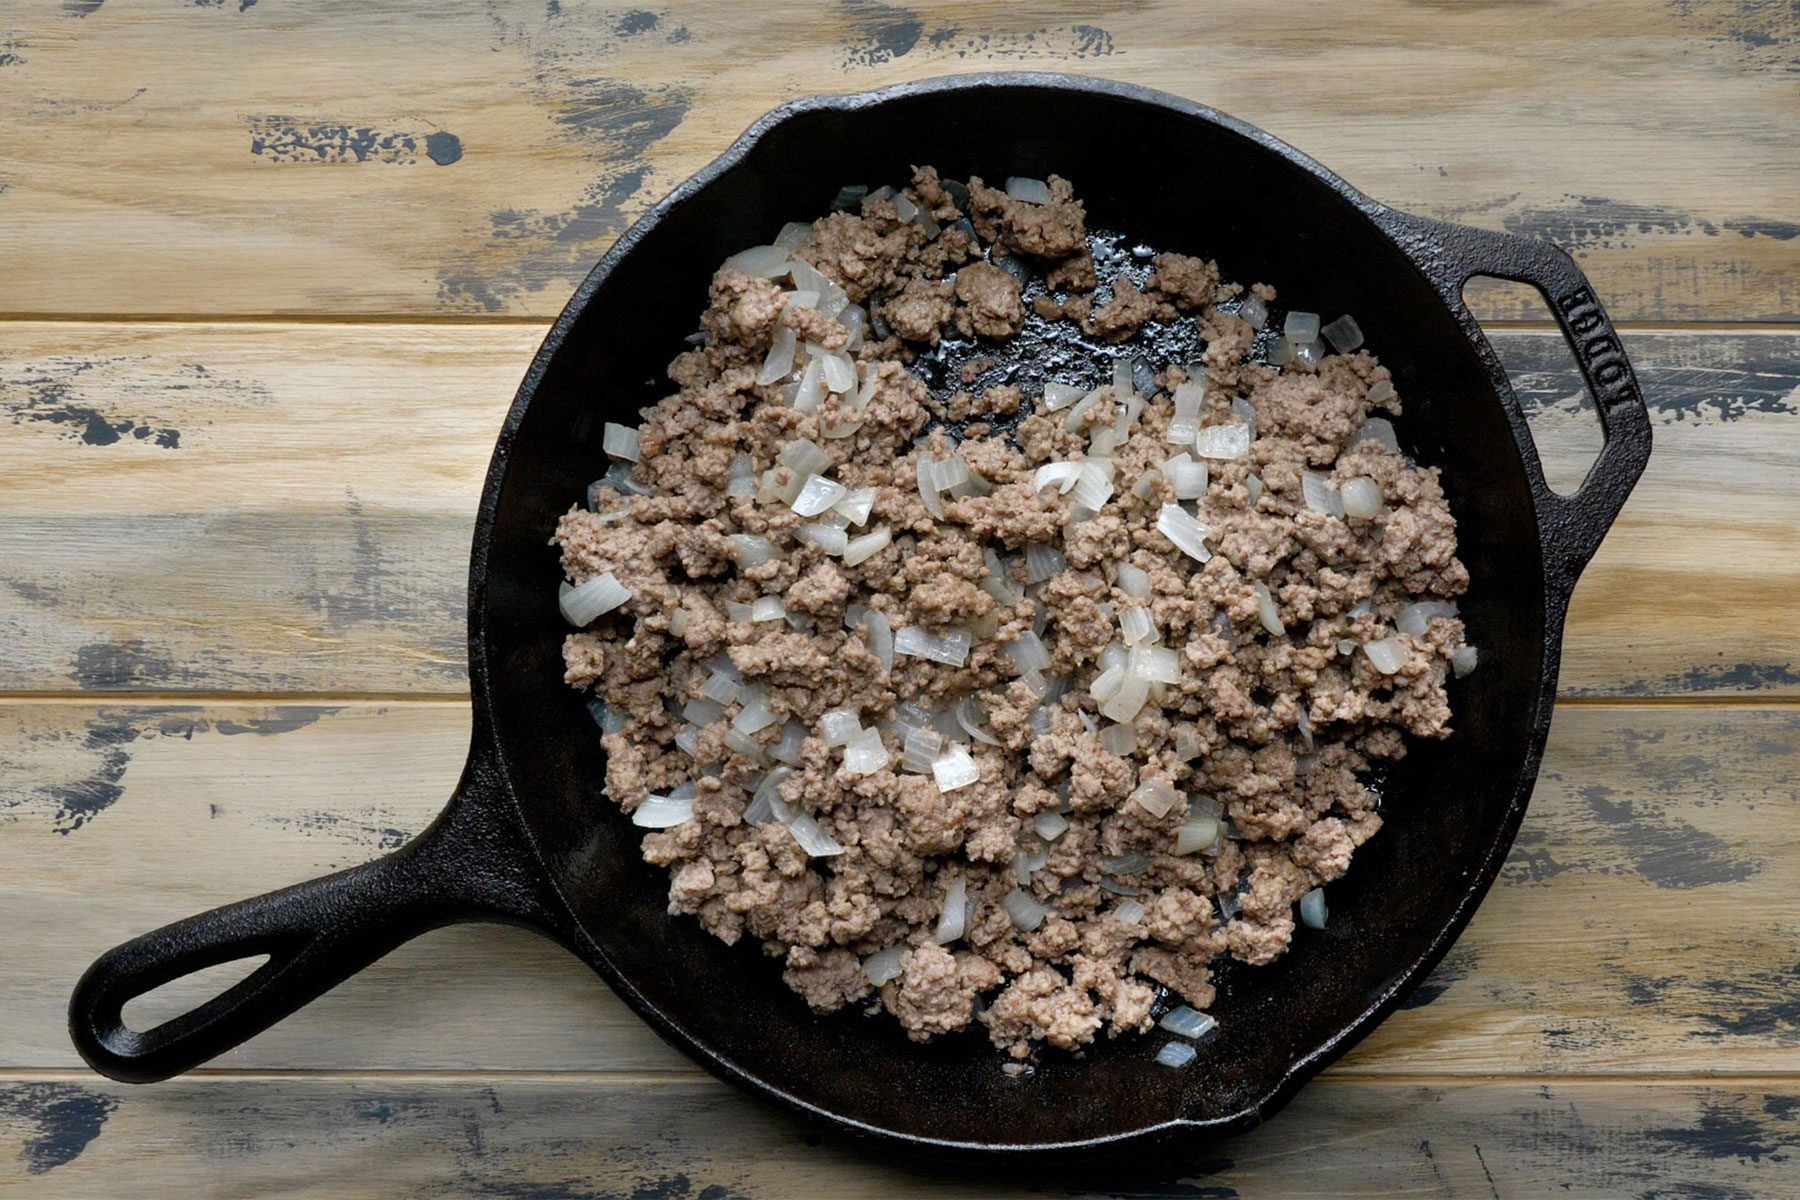 Overhead shot of large skillet; cook beef and onion over medium heat until meat is no longer pink; season with salt and pepper; wooden background;